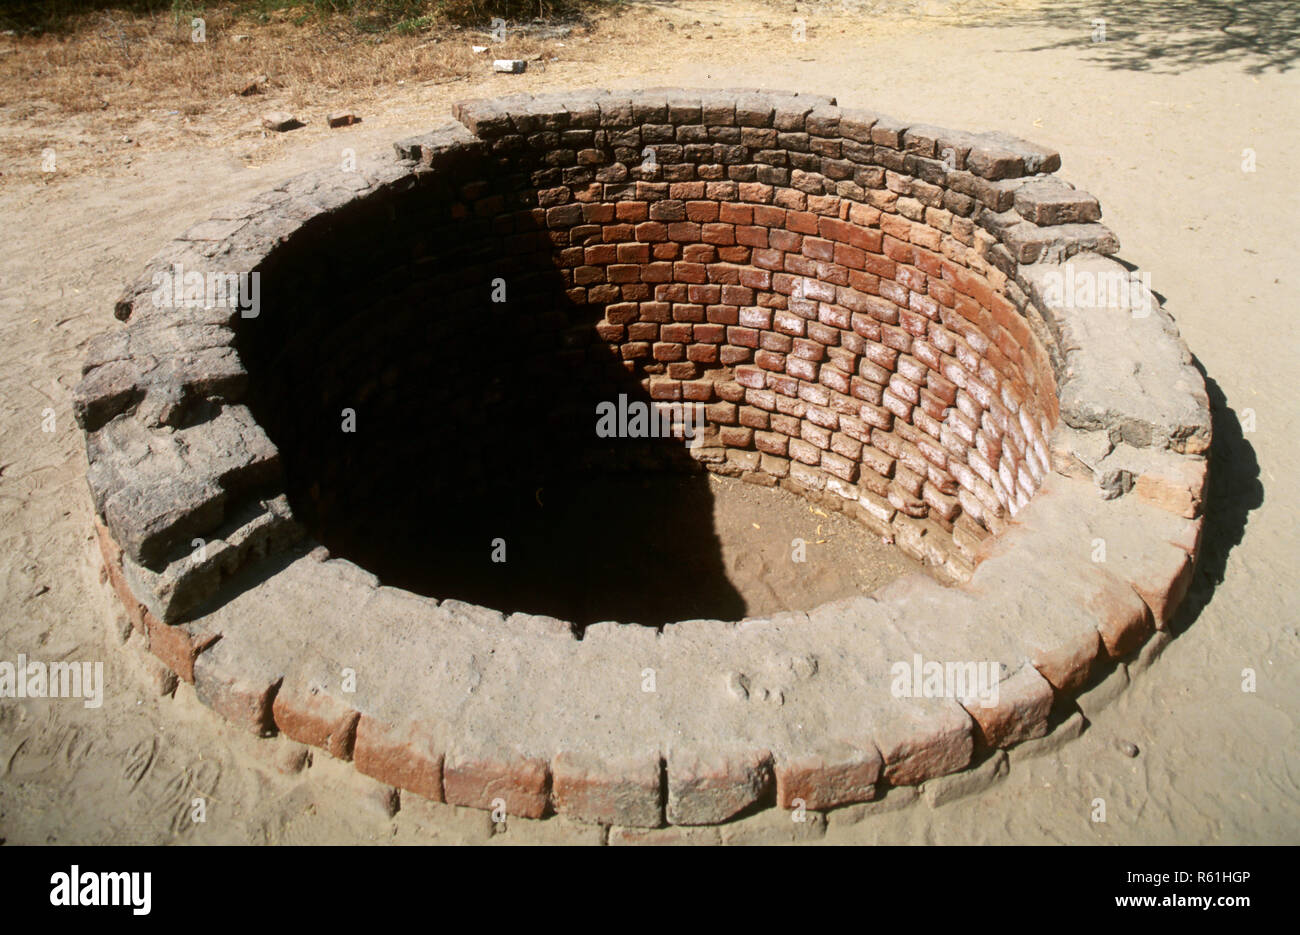 Indus Valley Civilization, Indus Harappa Civilizations, Archaeological remains of Harappa Port Town, 2300 to 1700 BC, Lothal, Bhal region, Saragwala, Gujarat, India, Asia Stock Photo